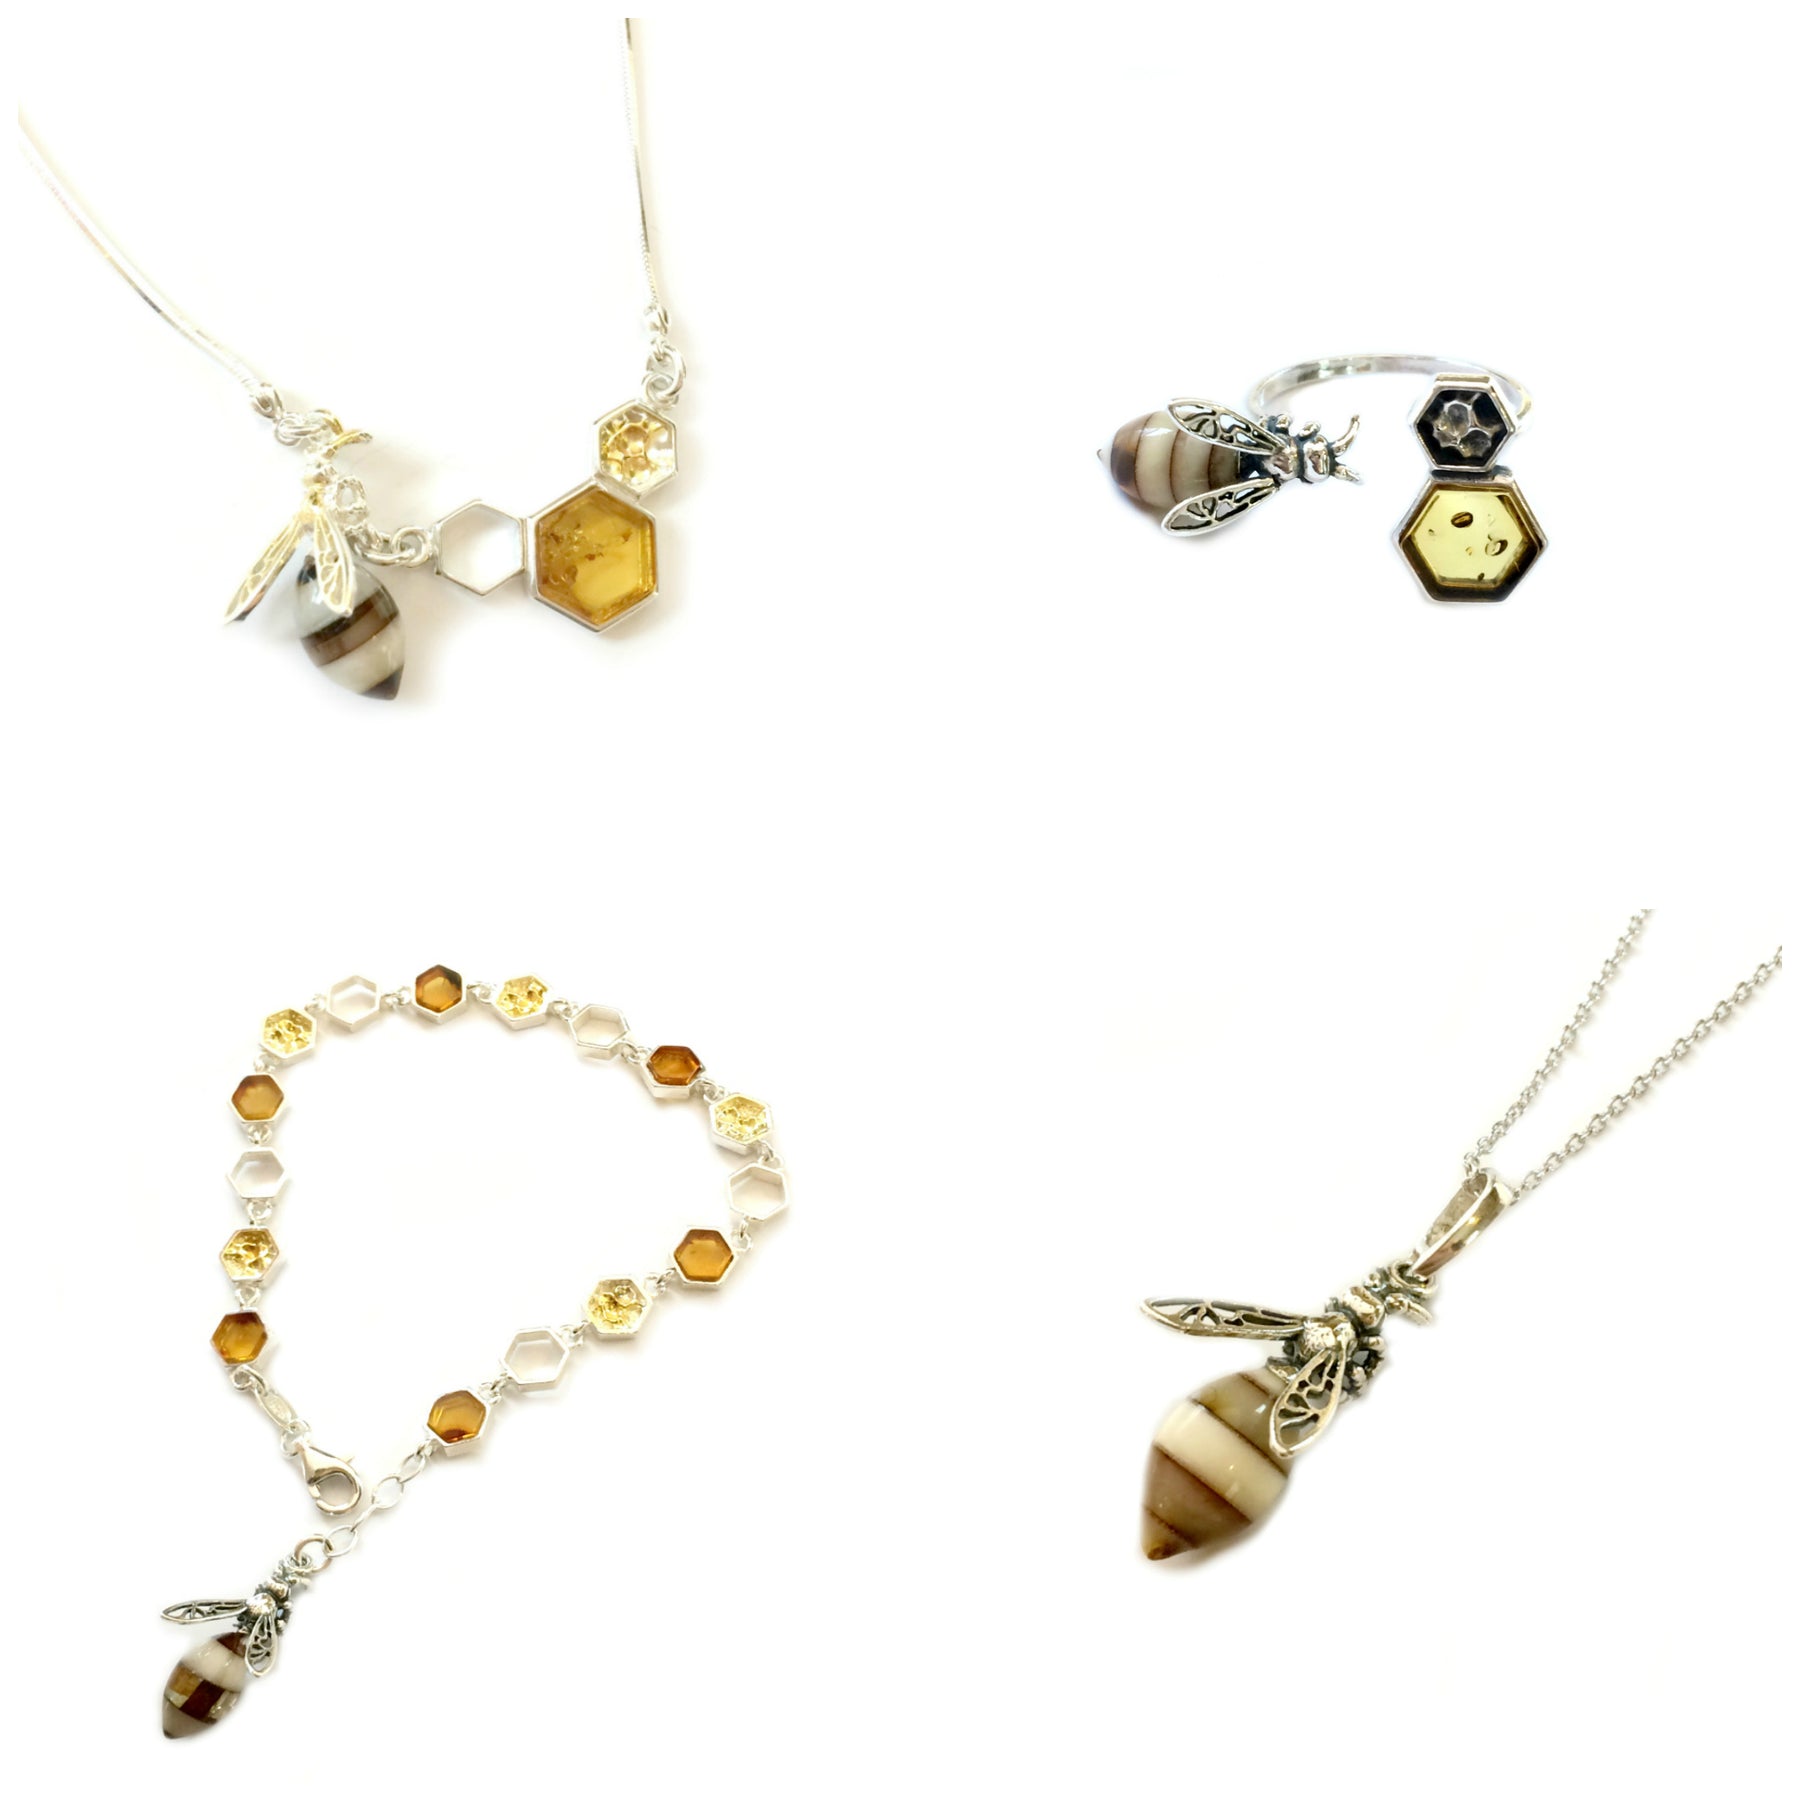 Image of four pieces of jewelry with bumblebee design